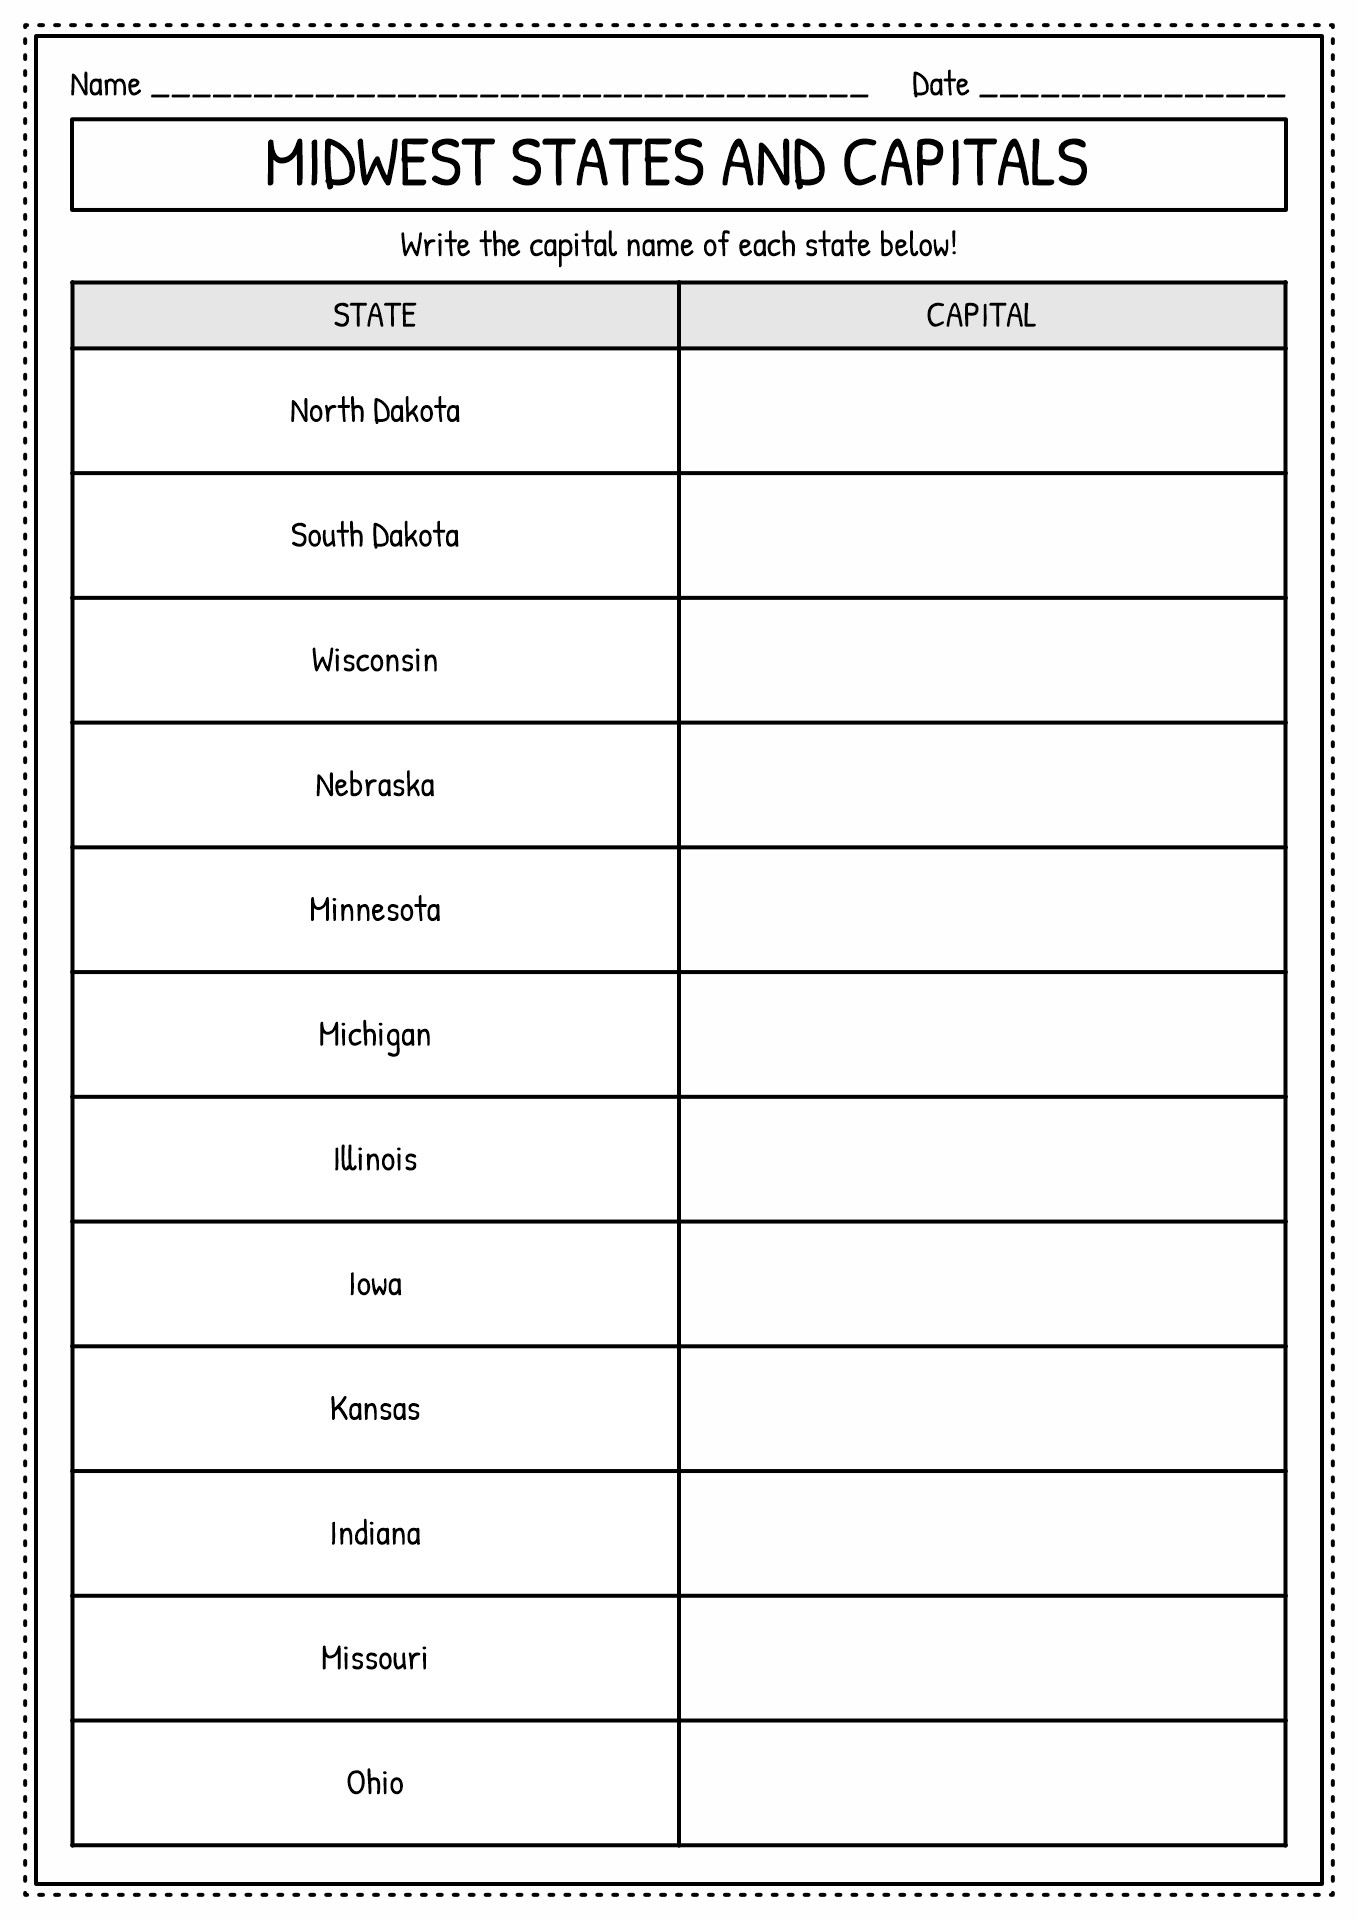 midwest-states-and-capitals-quiz-printable